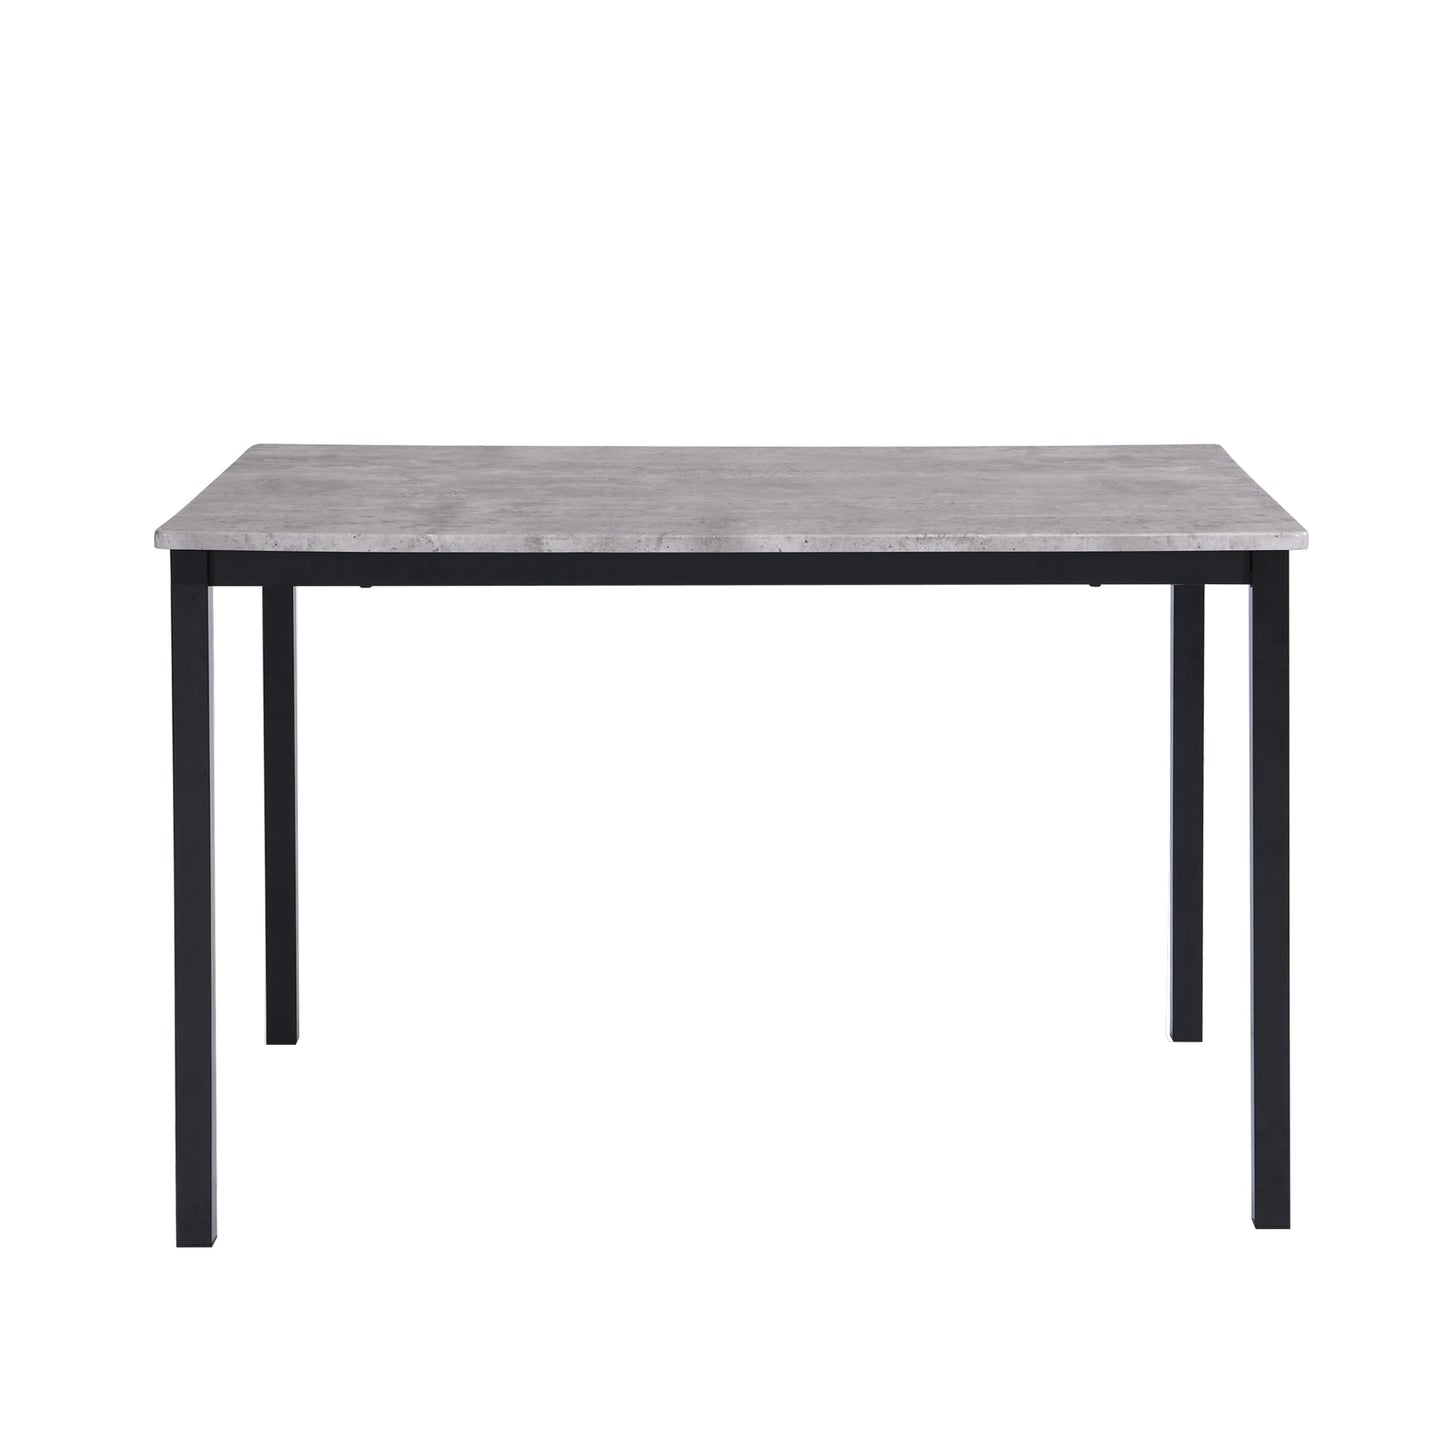 Milo dining table - 4 seater - Concrete effect and black - Laura James